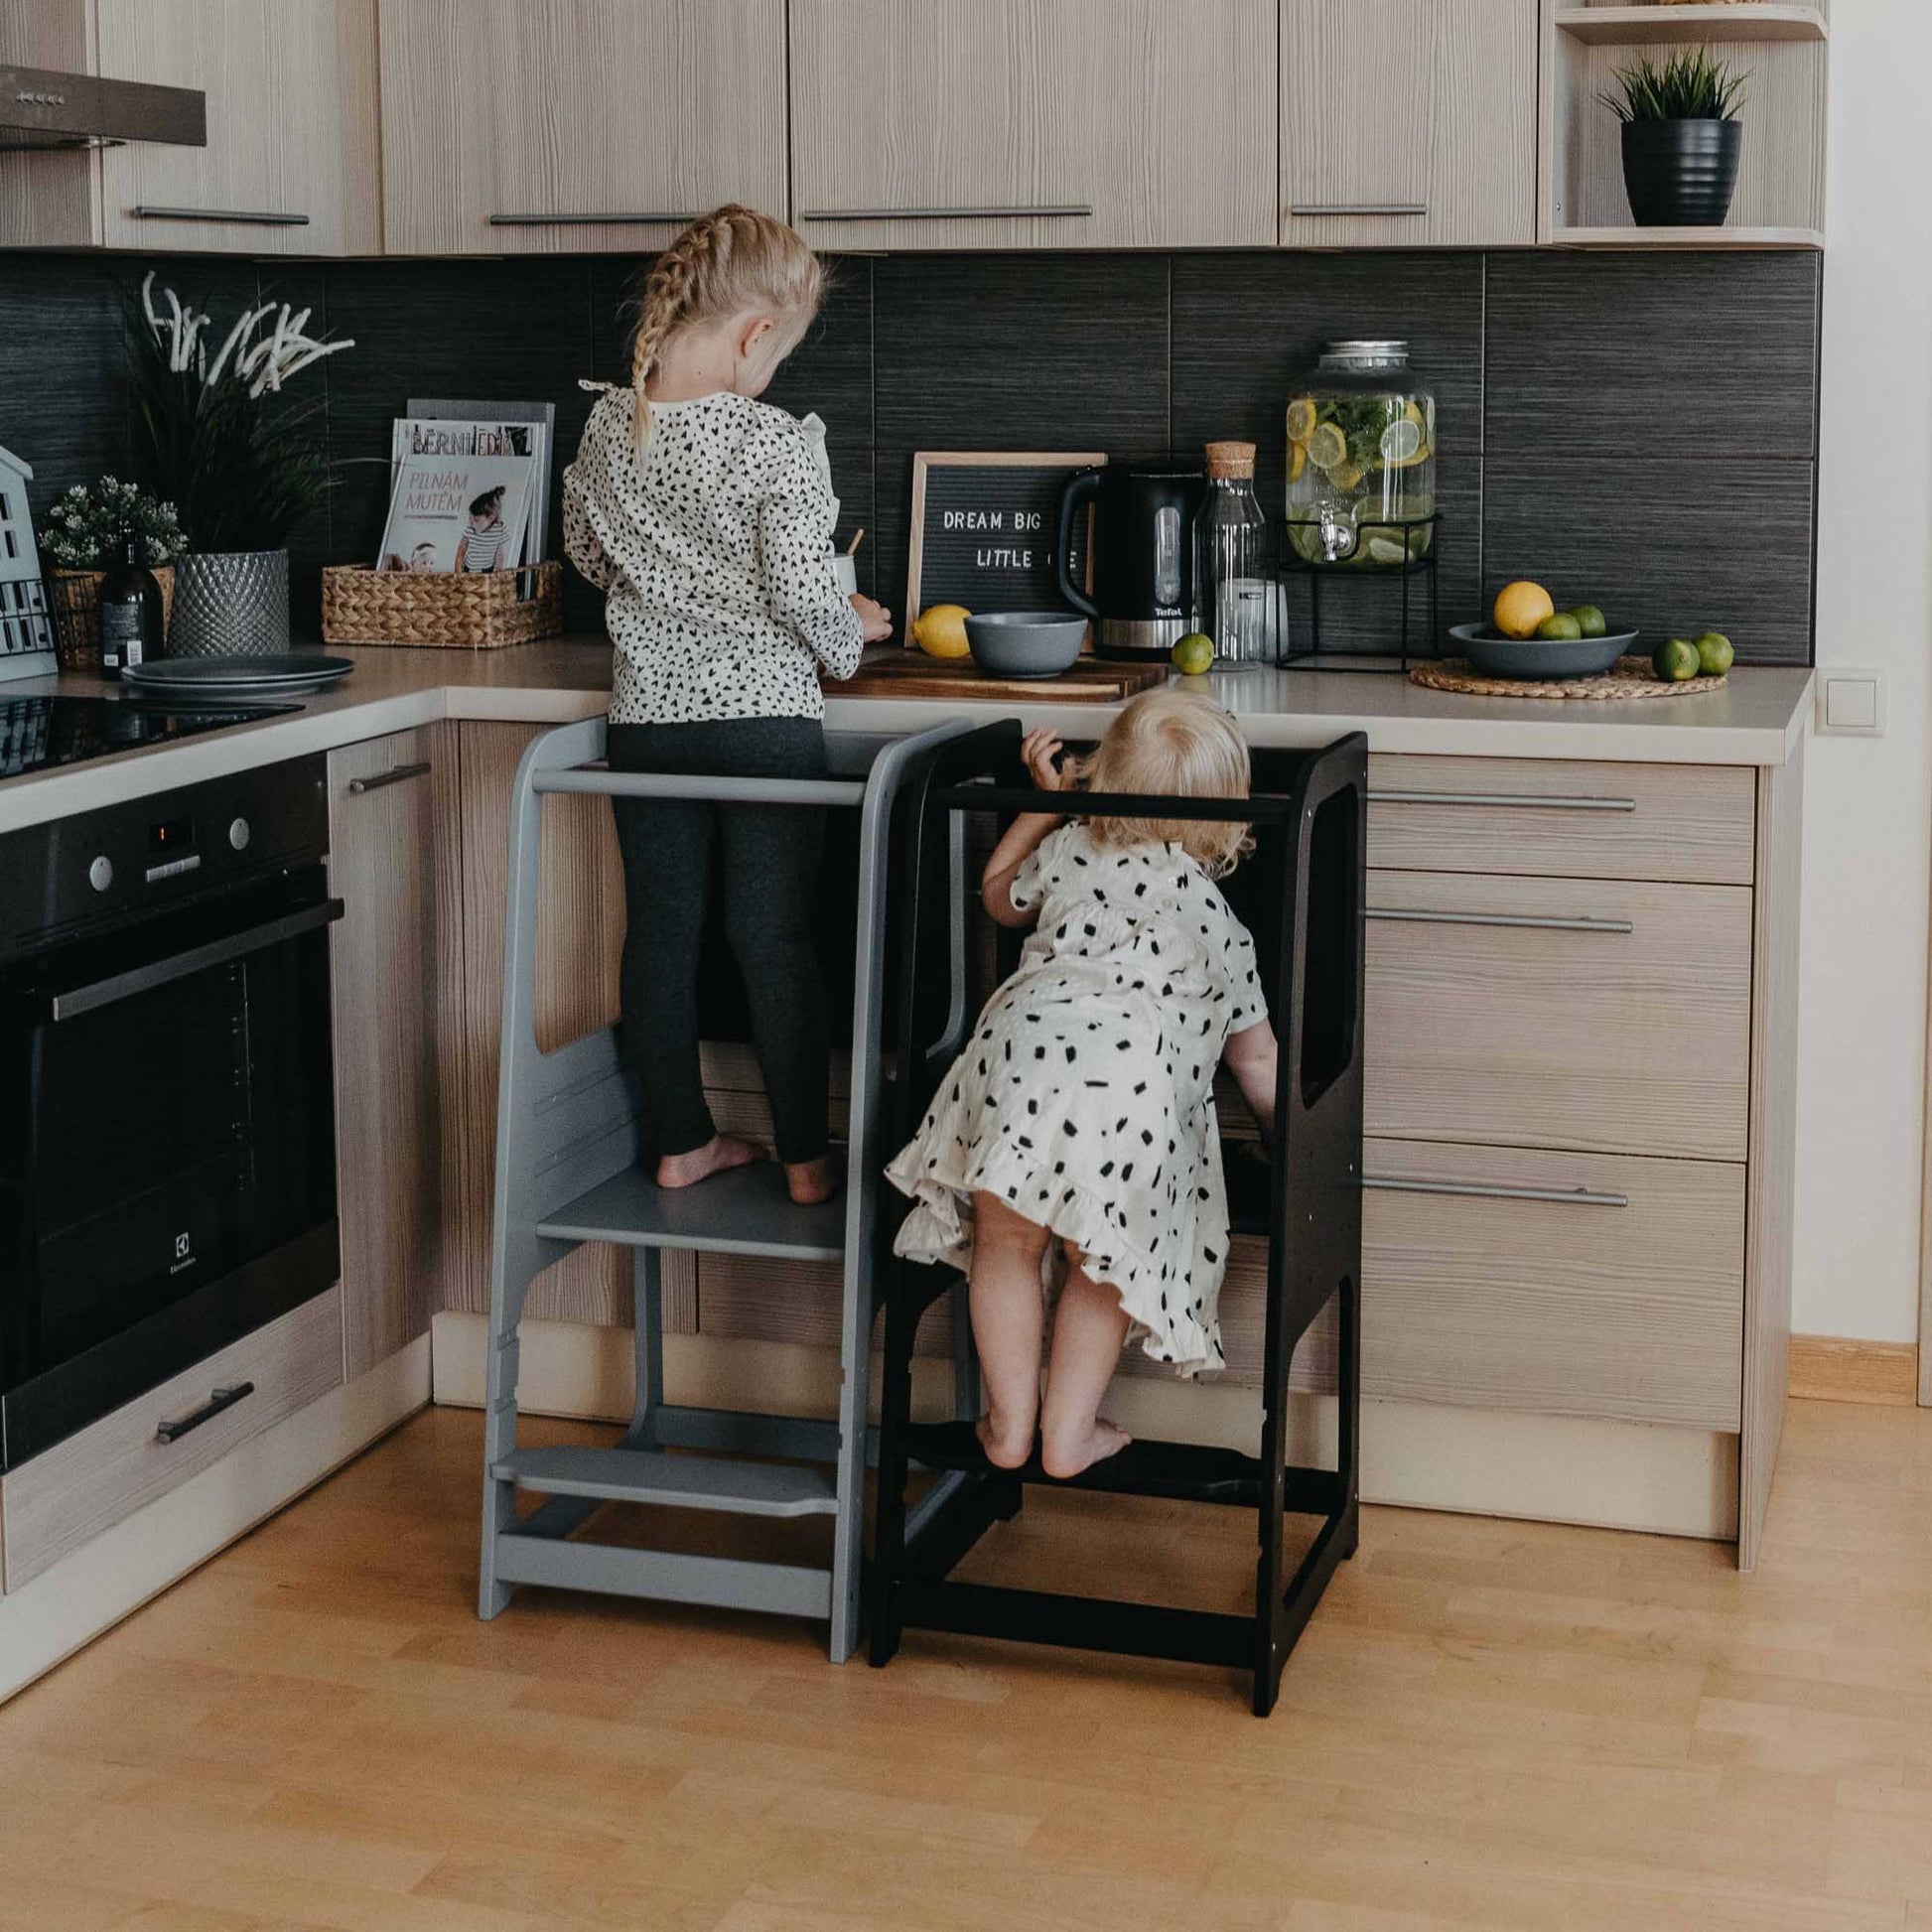 Two siblings standing on a Montessori step stool, joyfully engaged in cooking together. Encouraging independence and family bonding in the kitchen.